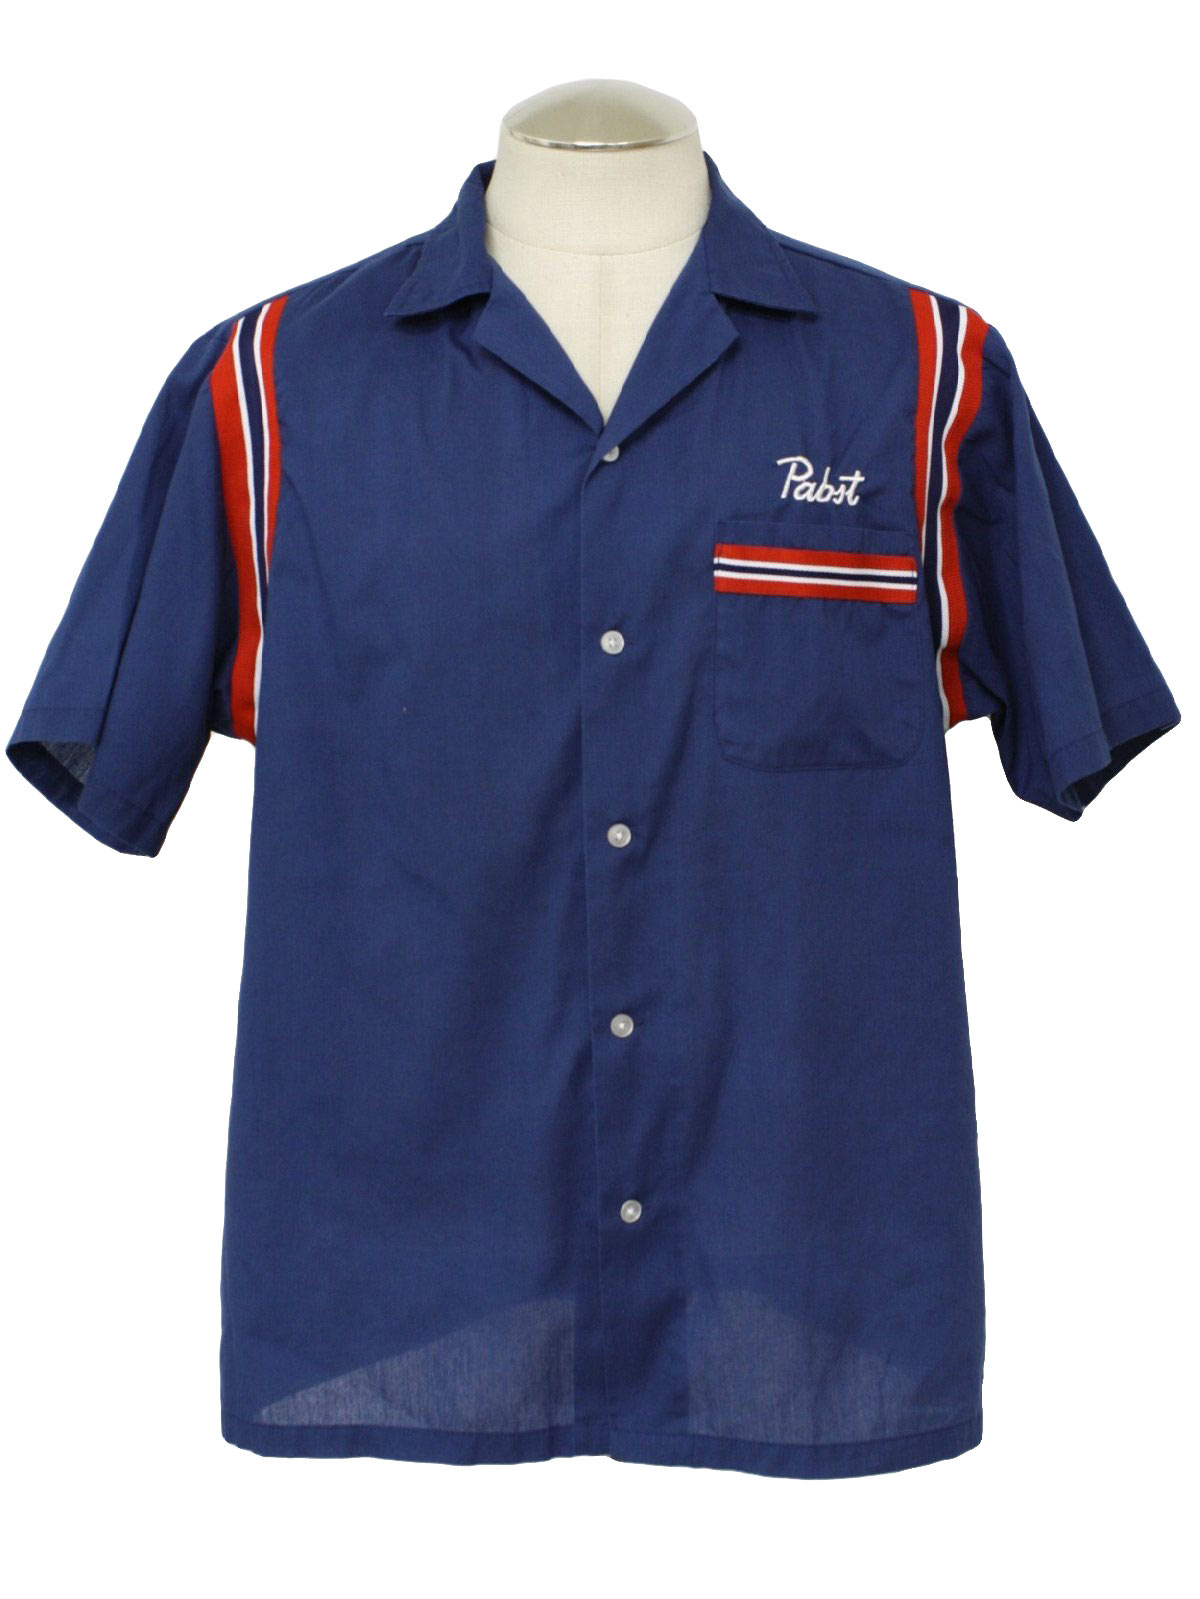 Hilton 1960s Vintage Bowling Shirt: 60s style (made in 90s) -Hilton ...